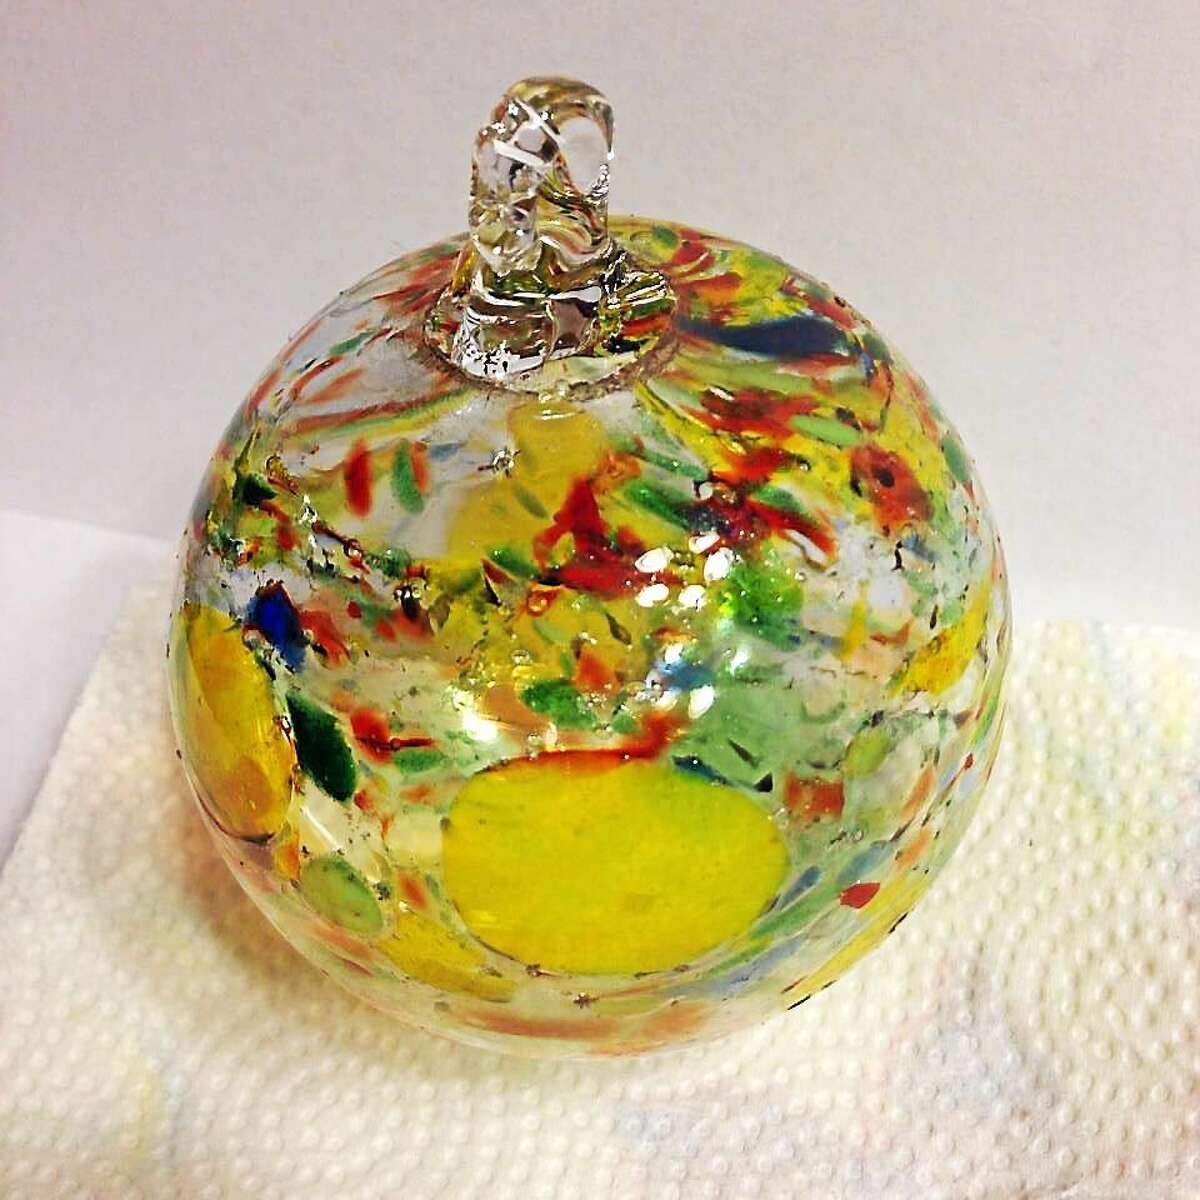 Contributed photo Markis Tomascak's glasswork. The artist is a participant in the Open Your Eyes studio tour in June.